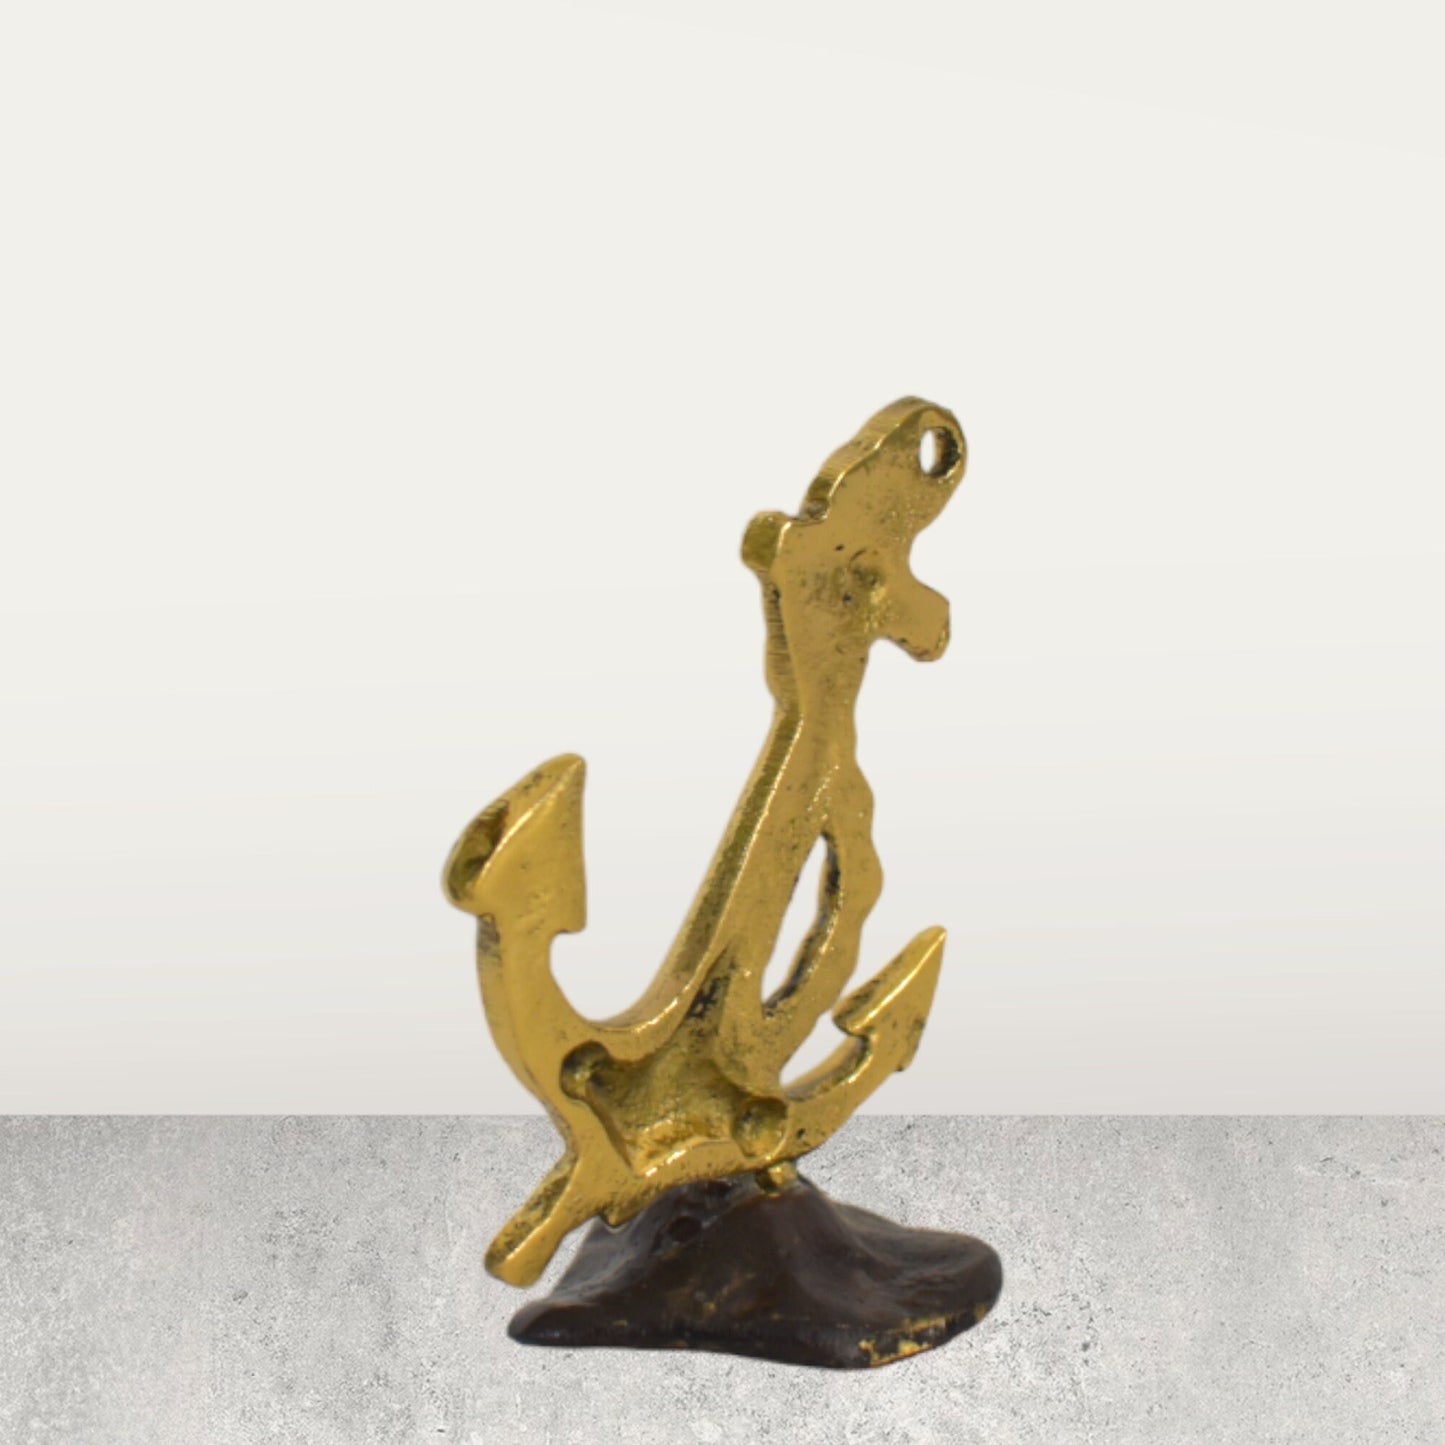 Anchor - Tool used to moor a vessel to the bottom of a sea to resist movement - Symbol of Hope, Steadfastness, Calm - pure bronze  statue